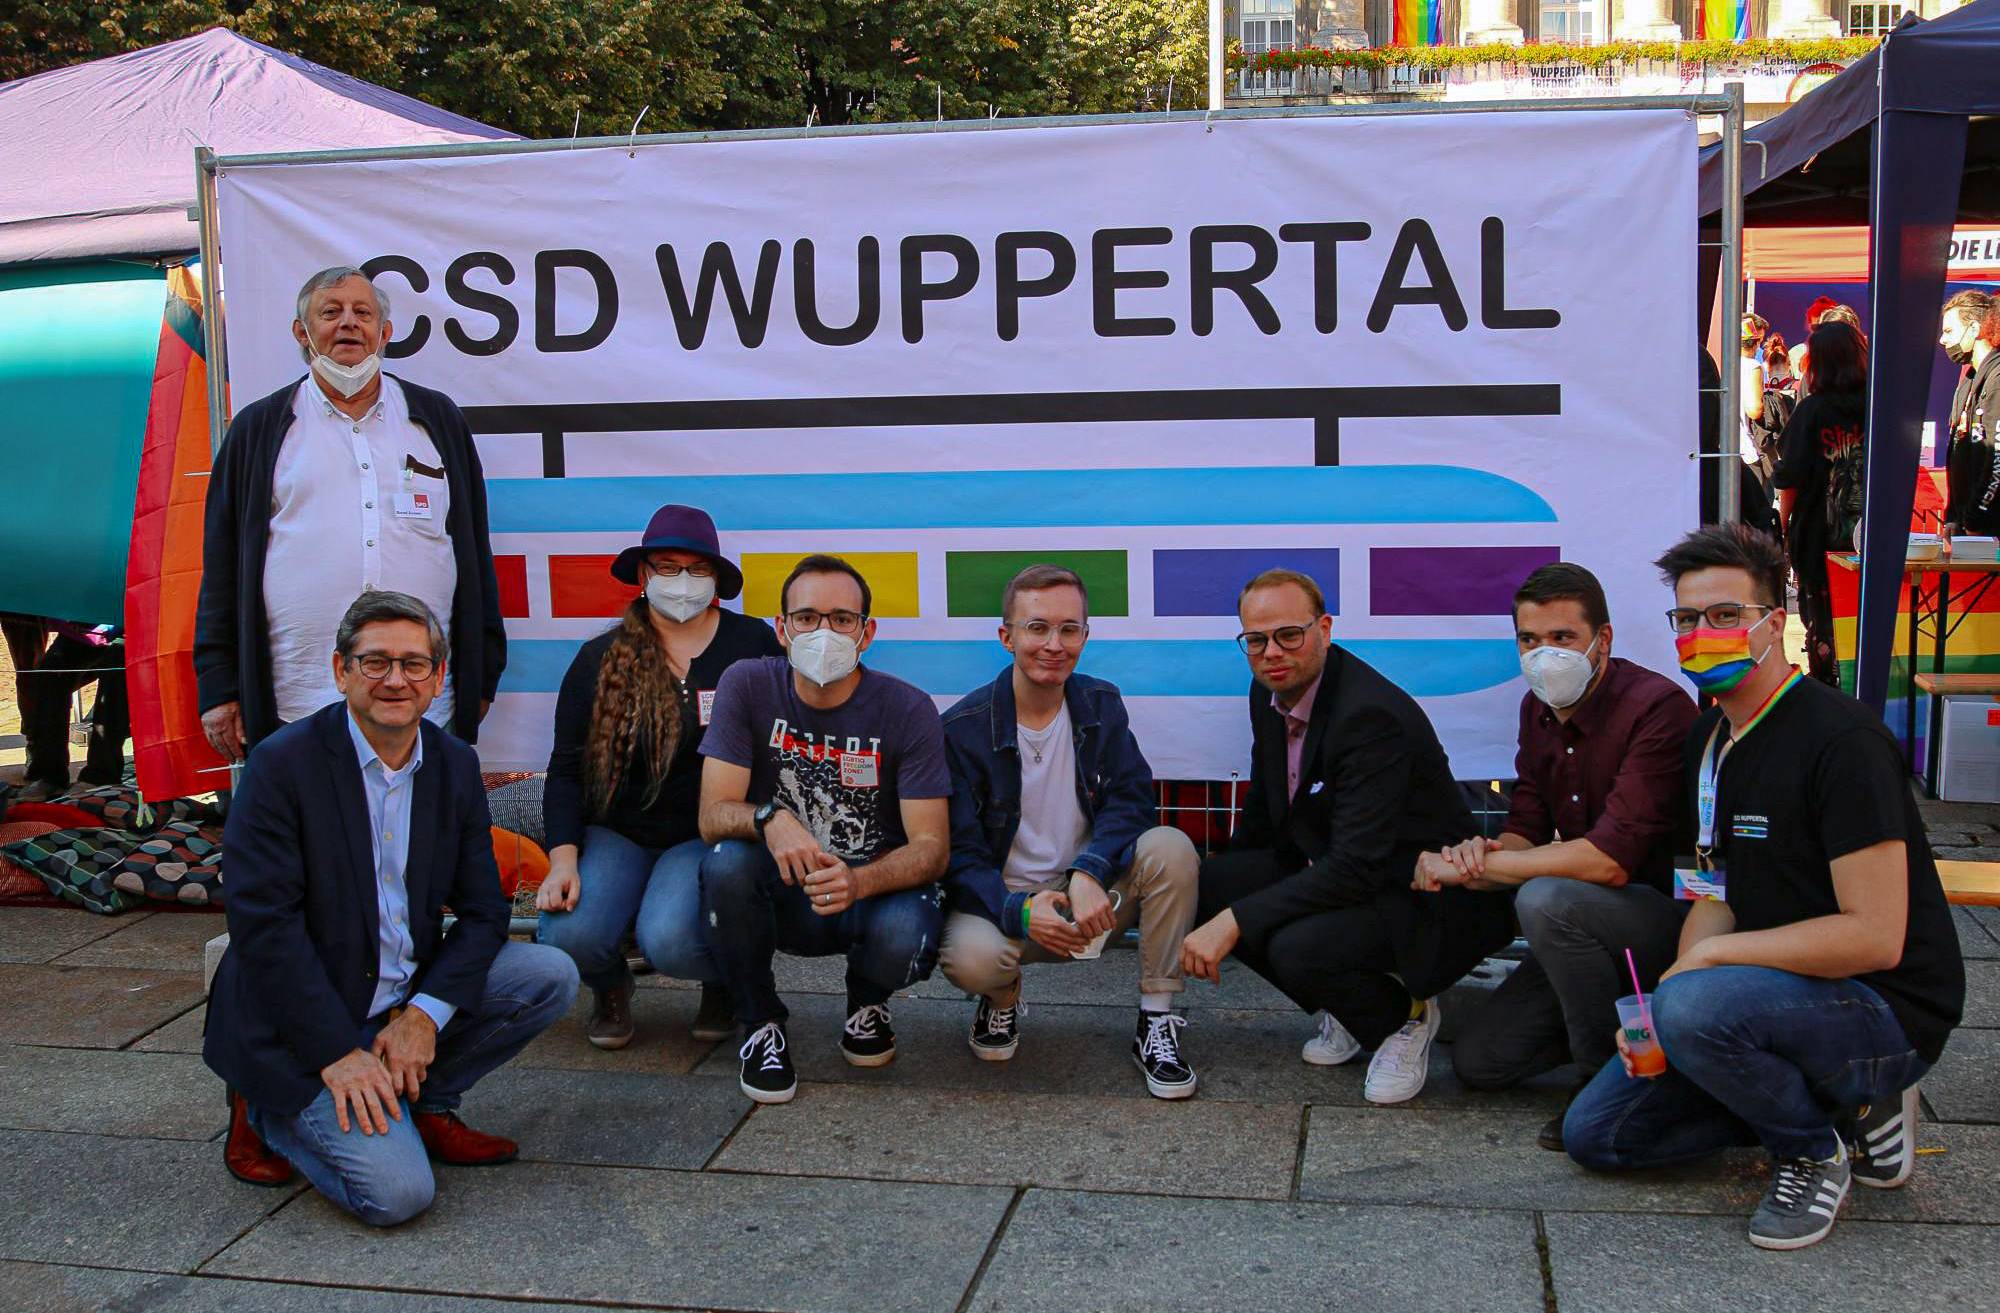 Christopher Street Day am Samstag in Wuppertal